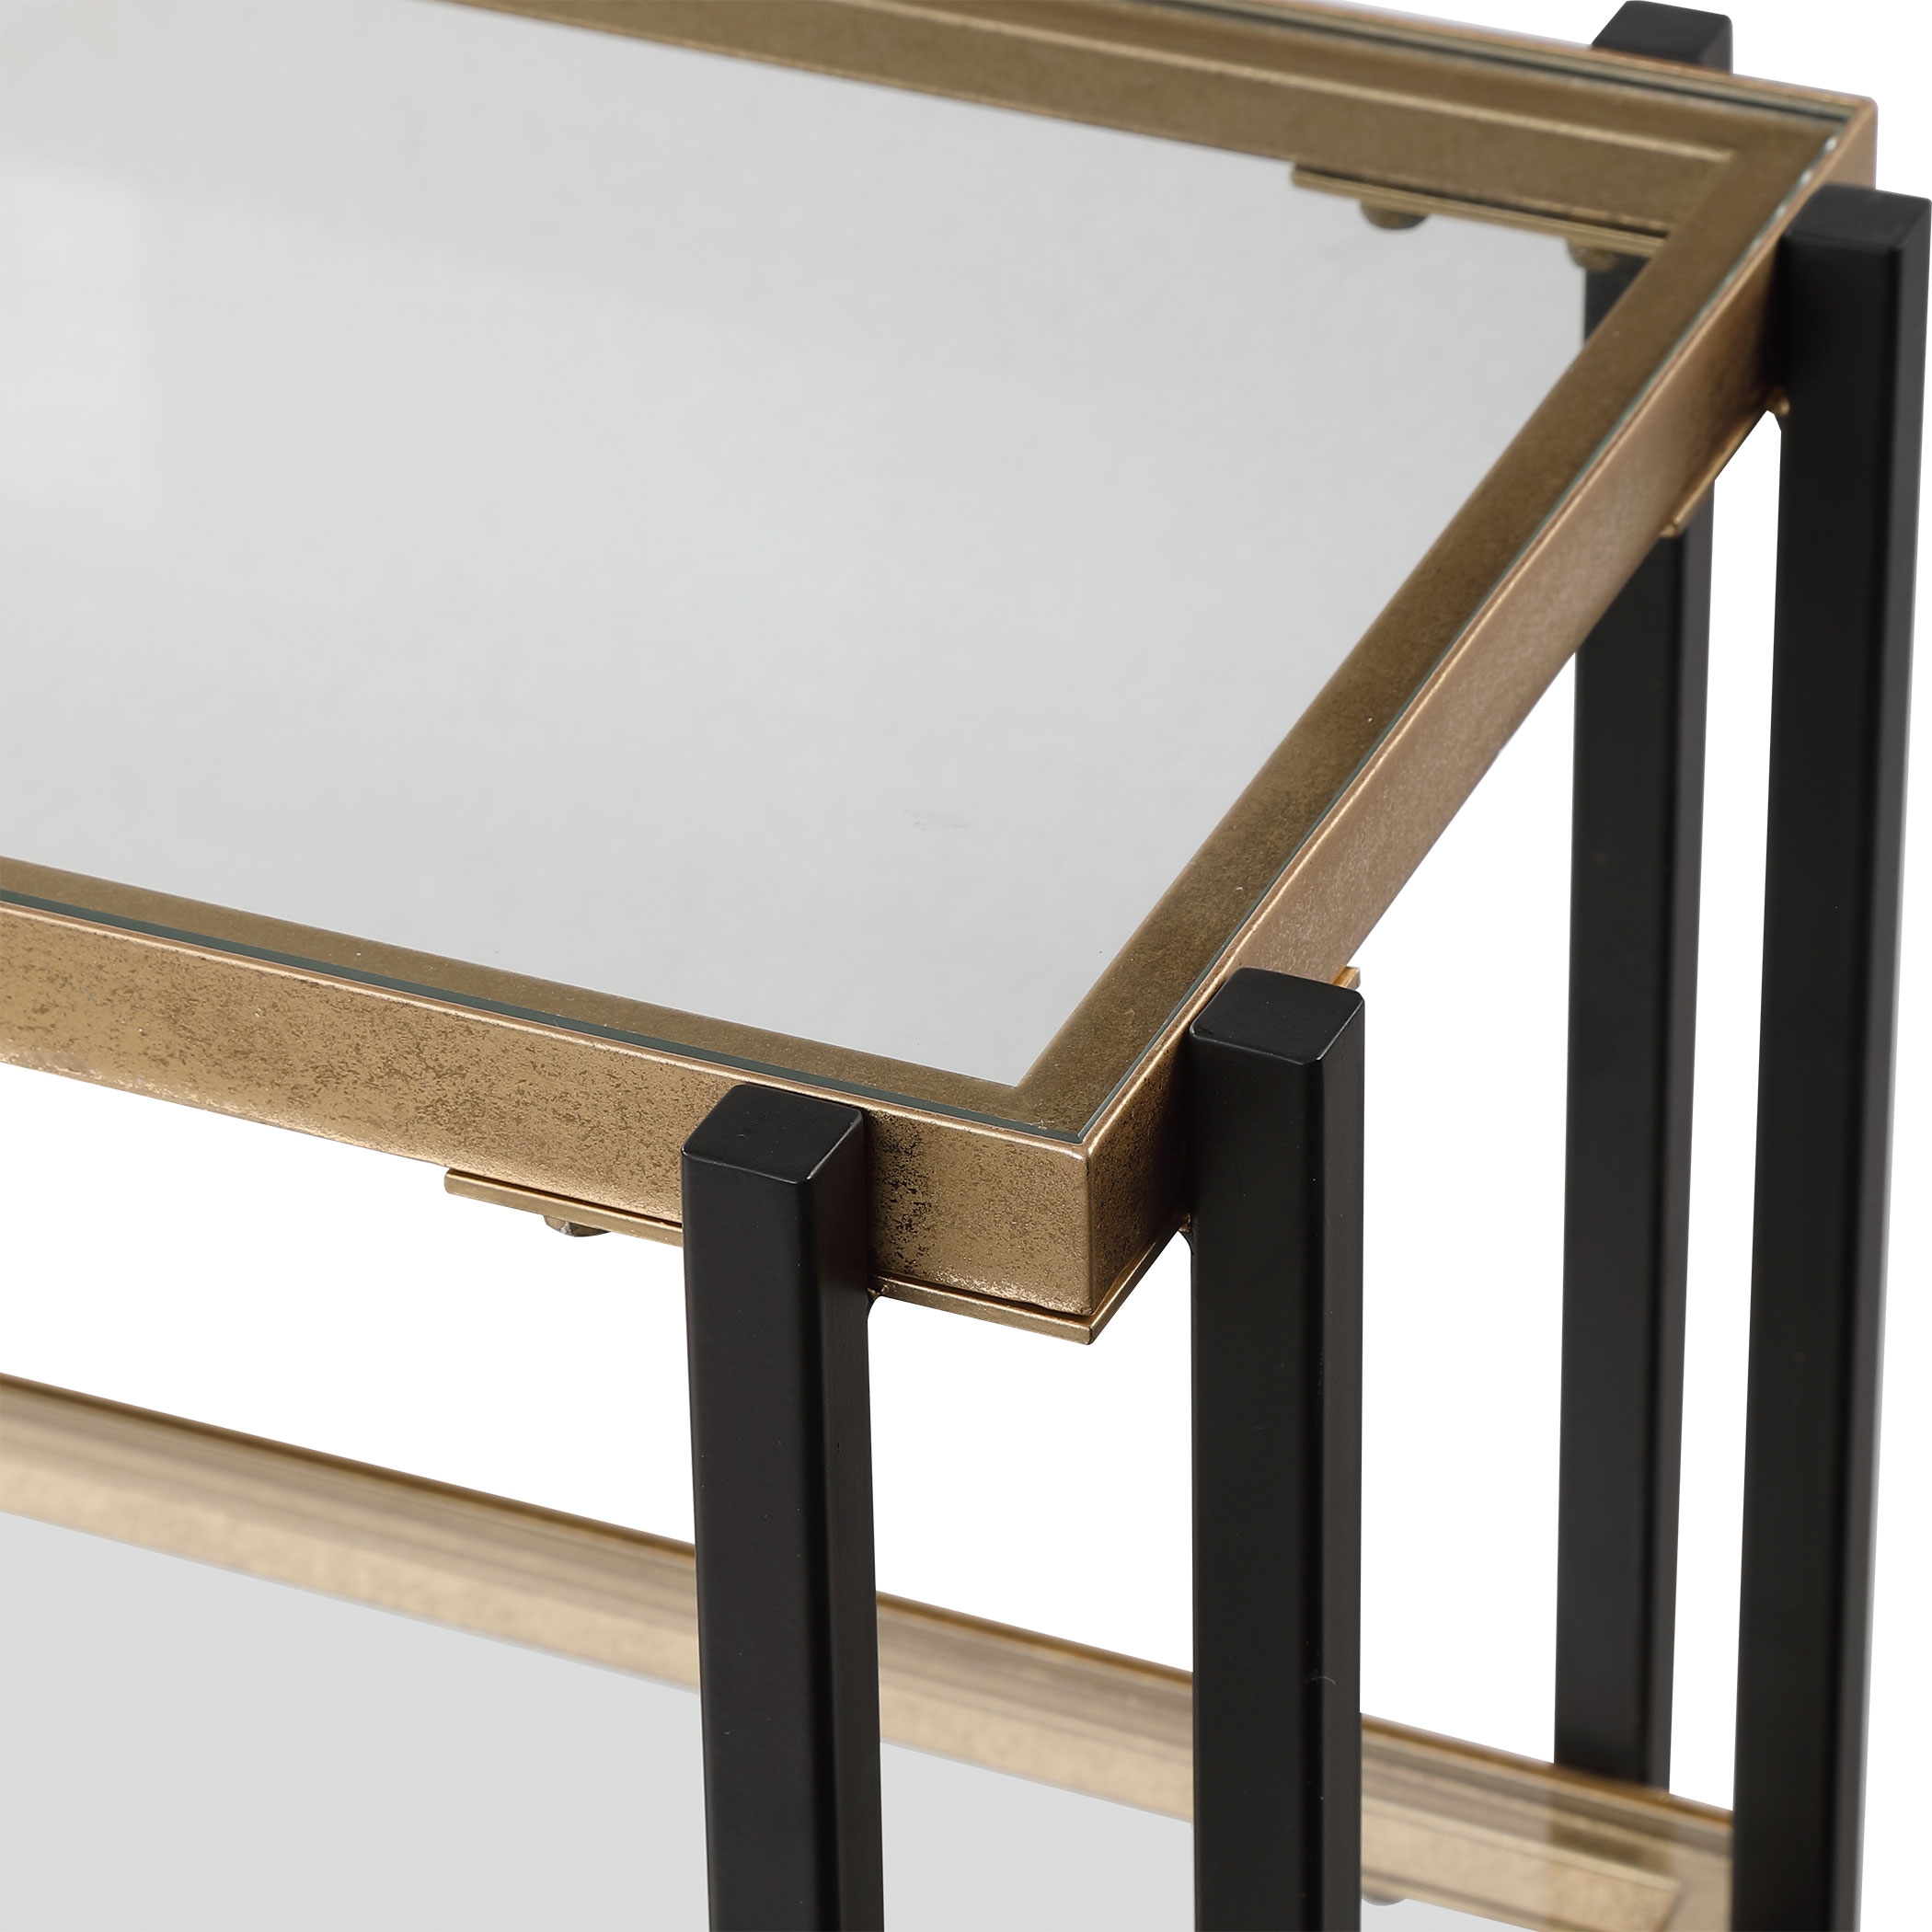 Kentmore Modern Console Table - Image 1